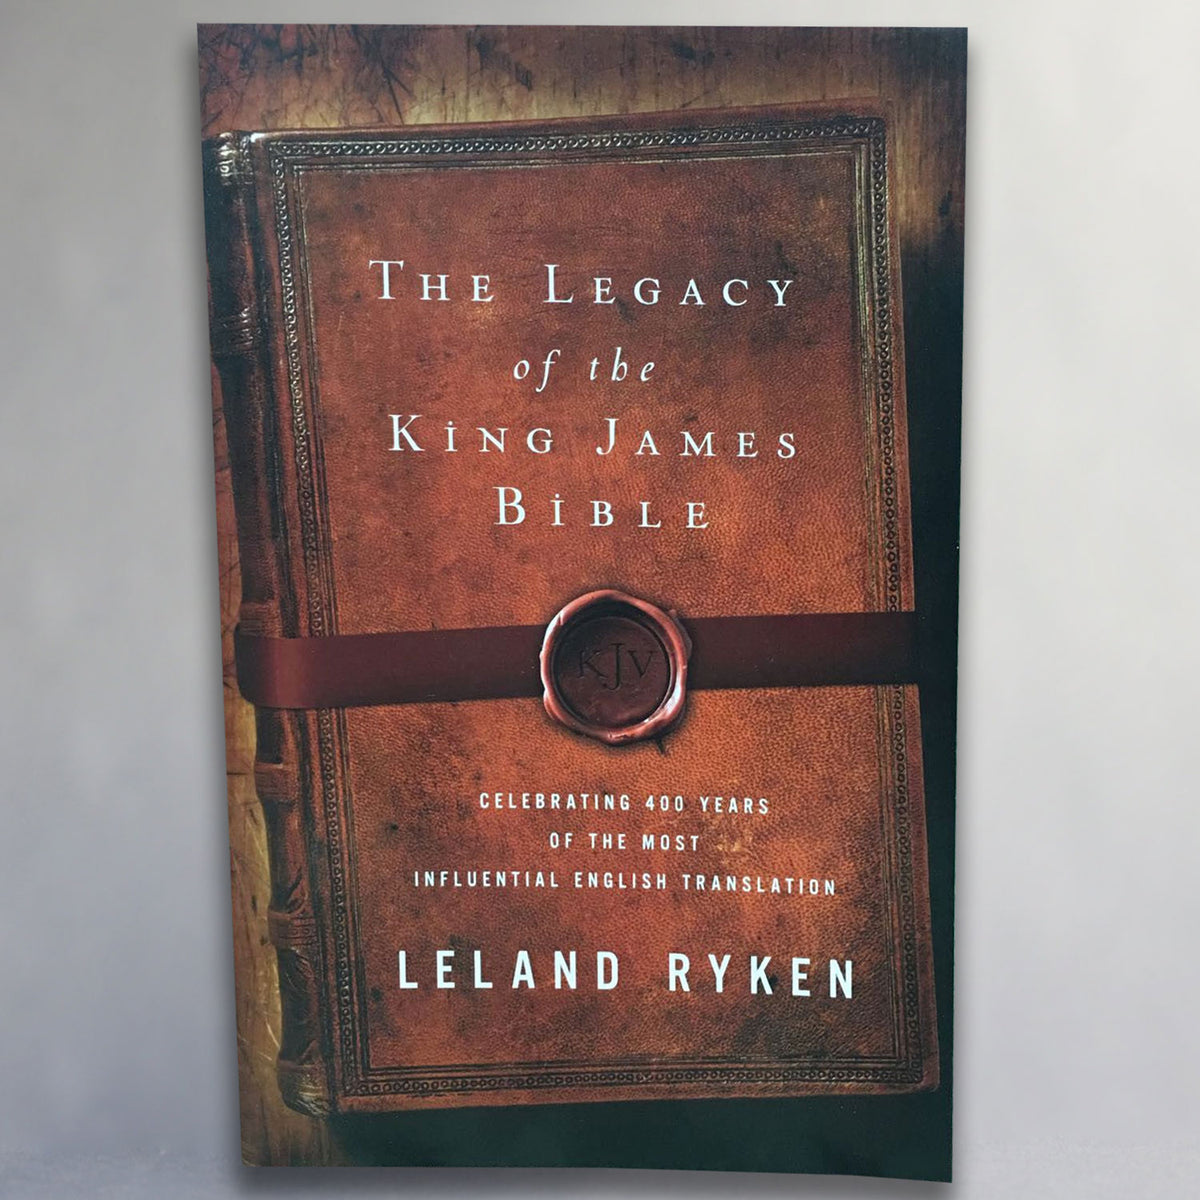 The Legacy of the King James Bible (Ryken)